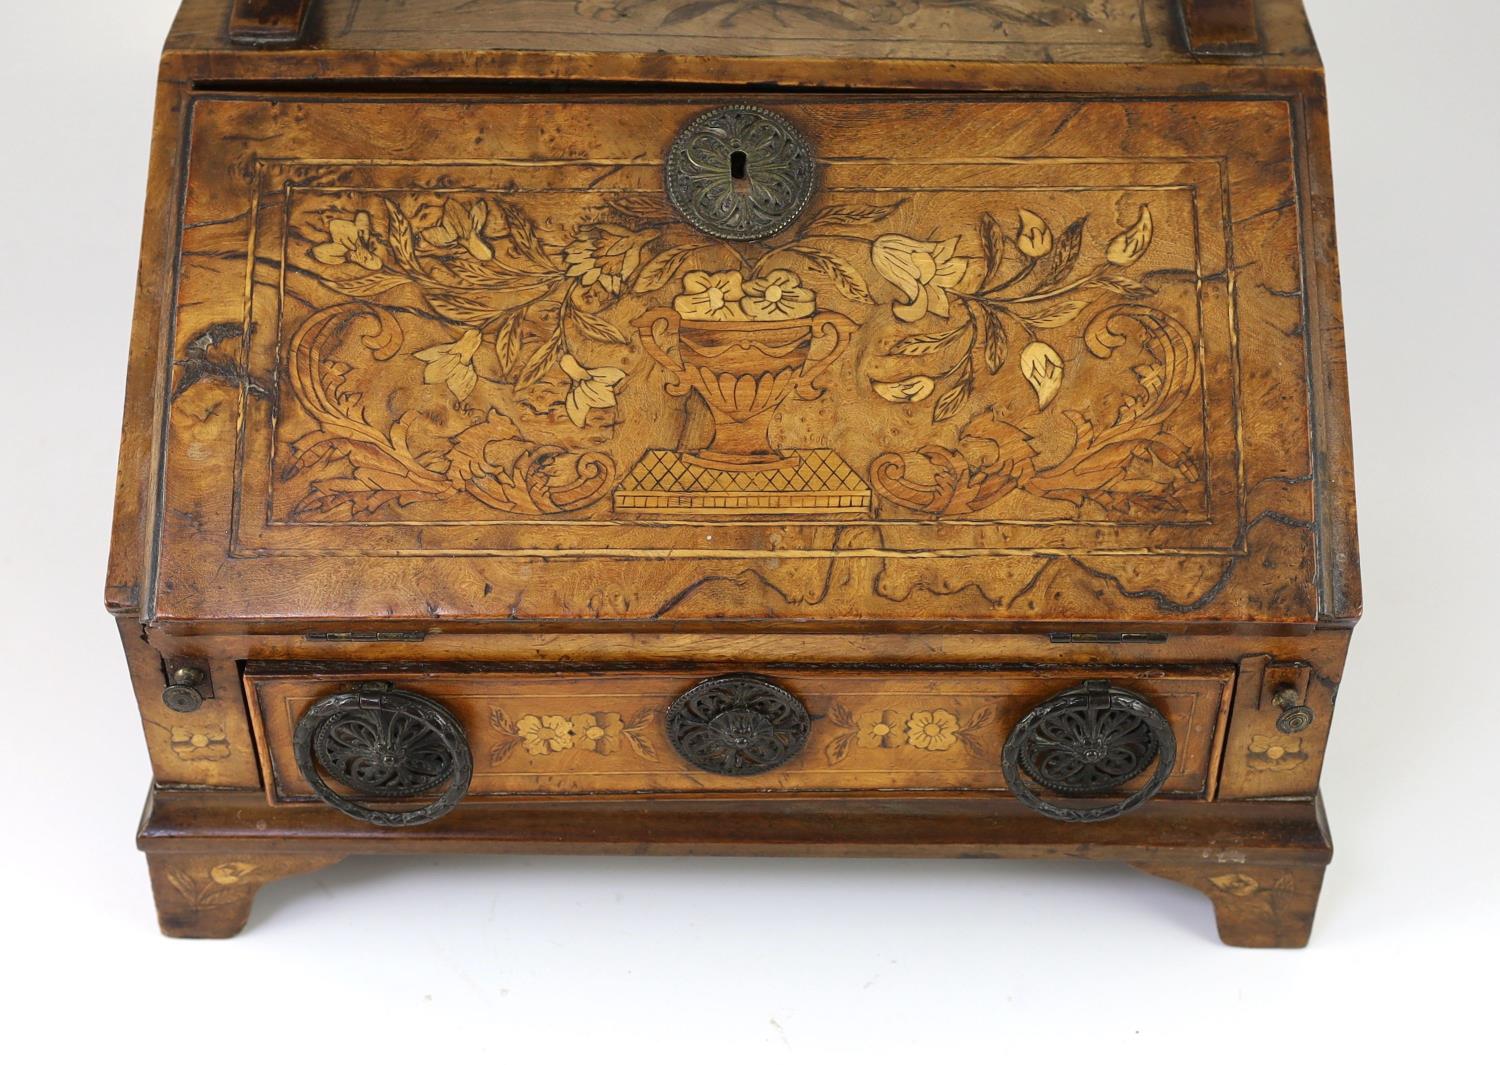 A mid to late 18th century Dutch walnut and marquetry toilet mirror bureau,with original plate, - Image 2 of 5